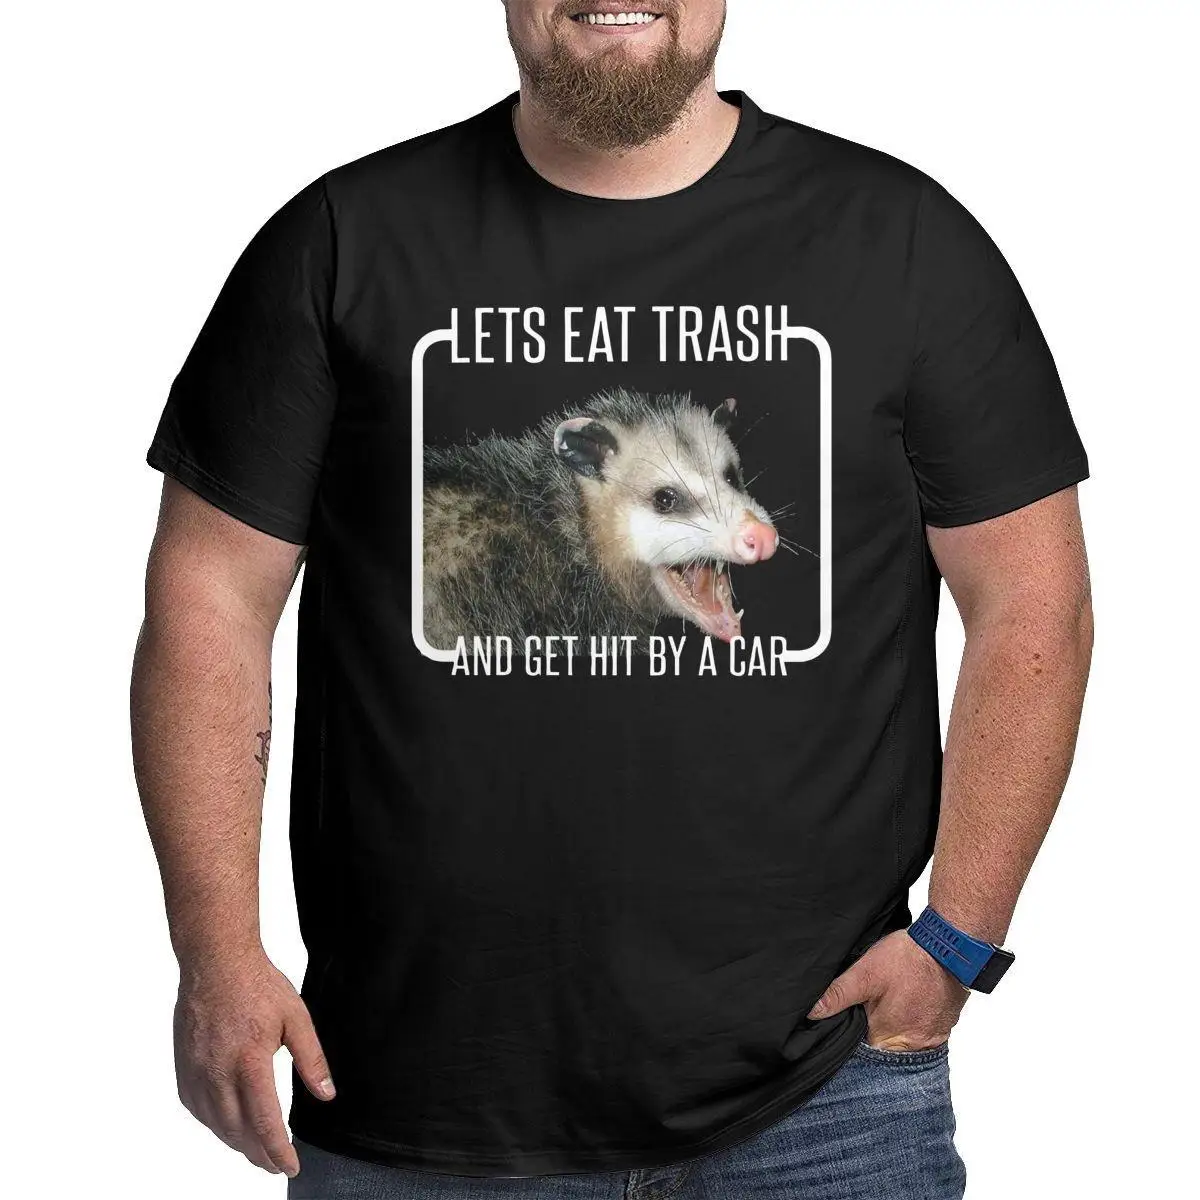 Lets Eat Trash Get Hit By A Car T Shirt Men's Pure Cotton T-Shirts O Neck Opossum Big Tall Tees Short Sleeve Tops Plus Size